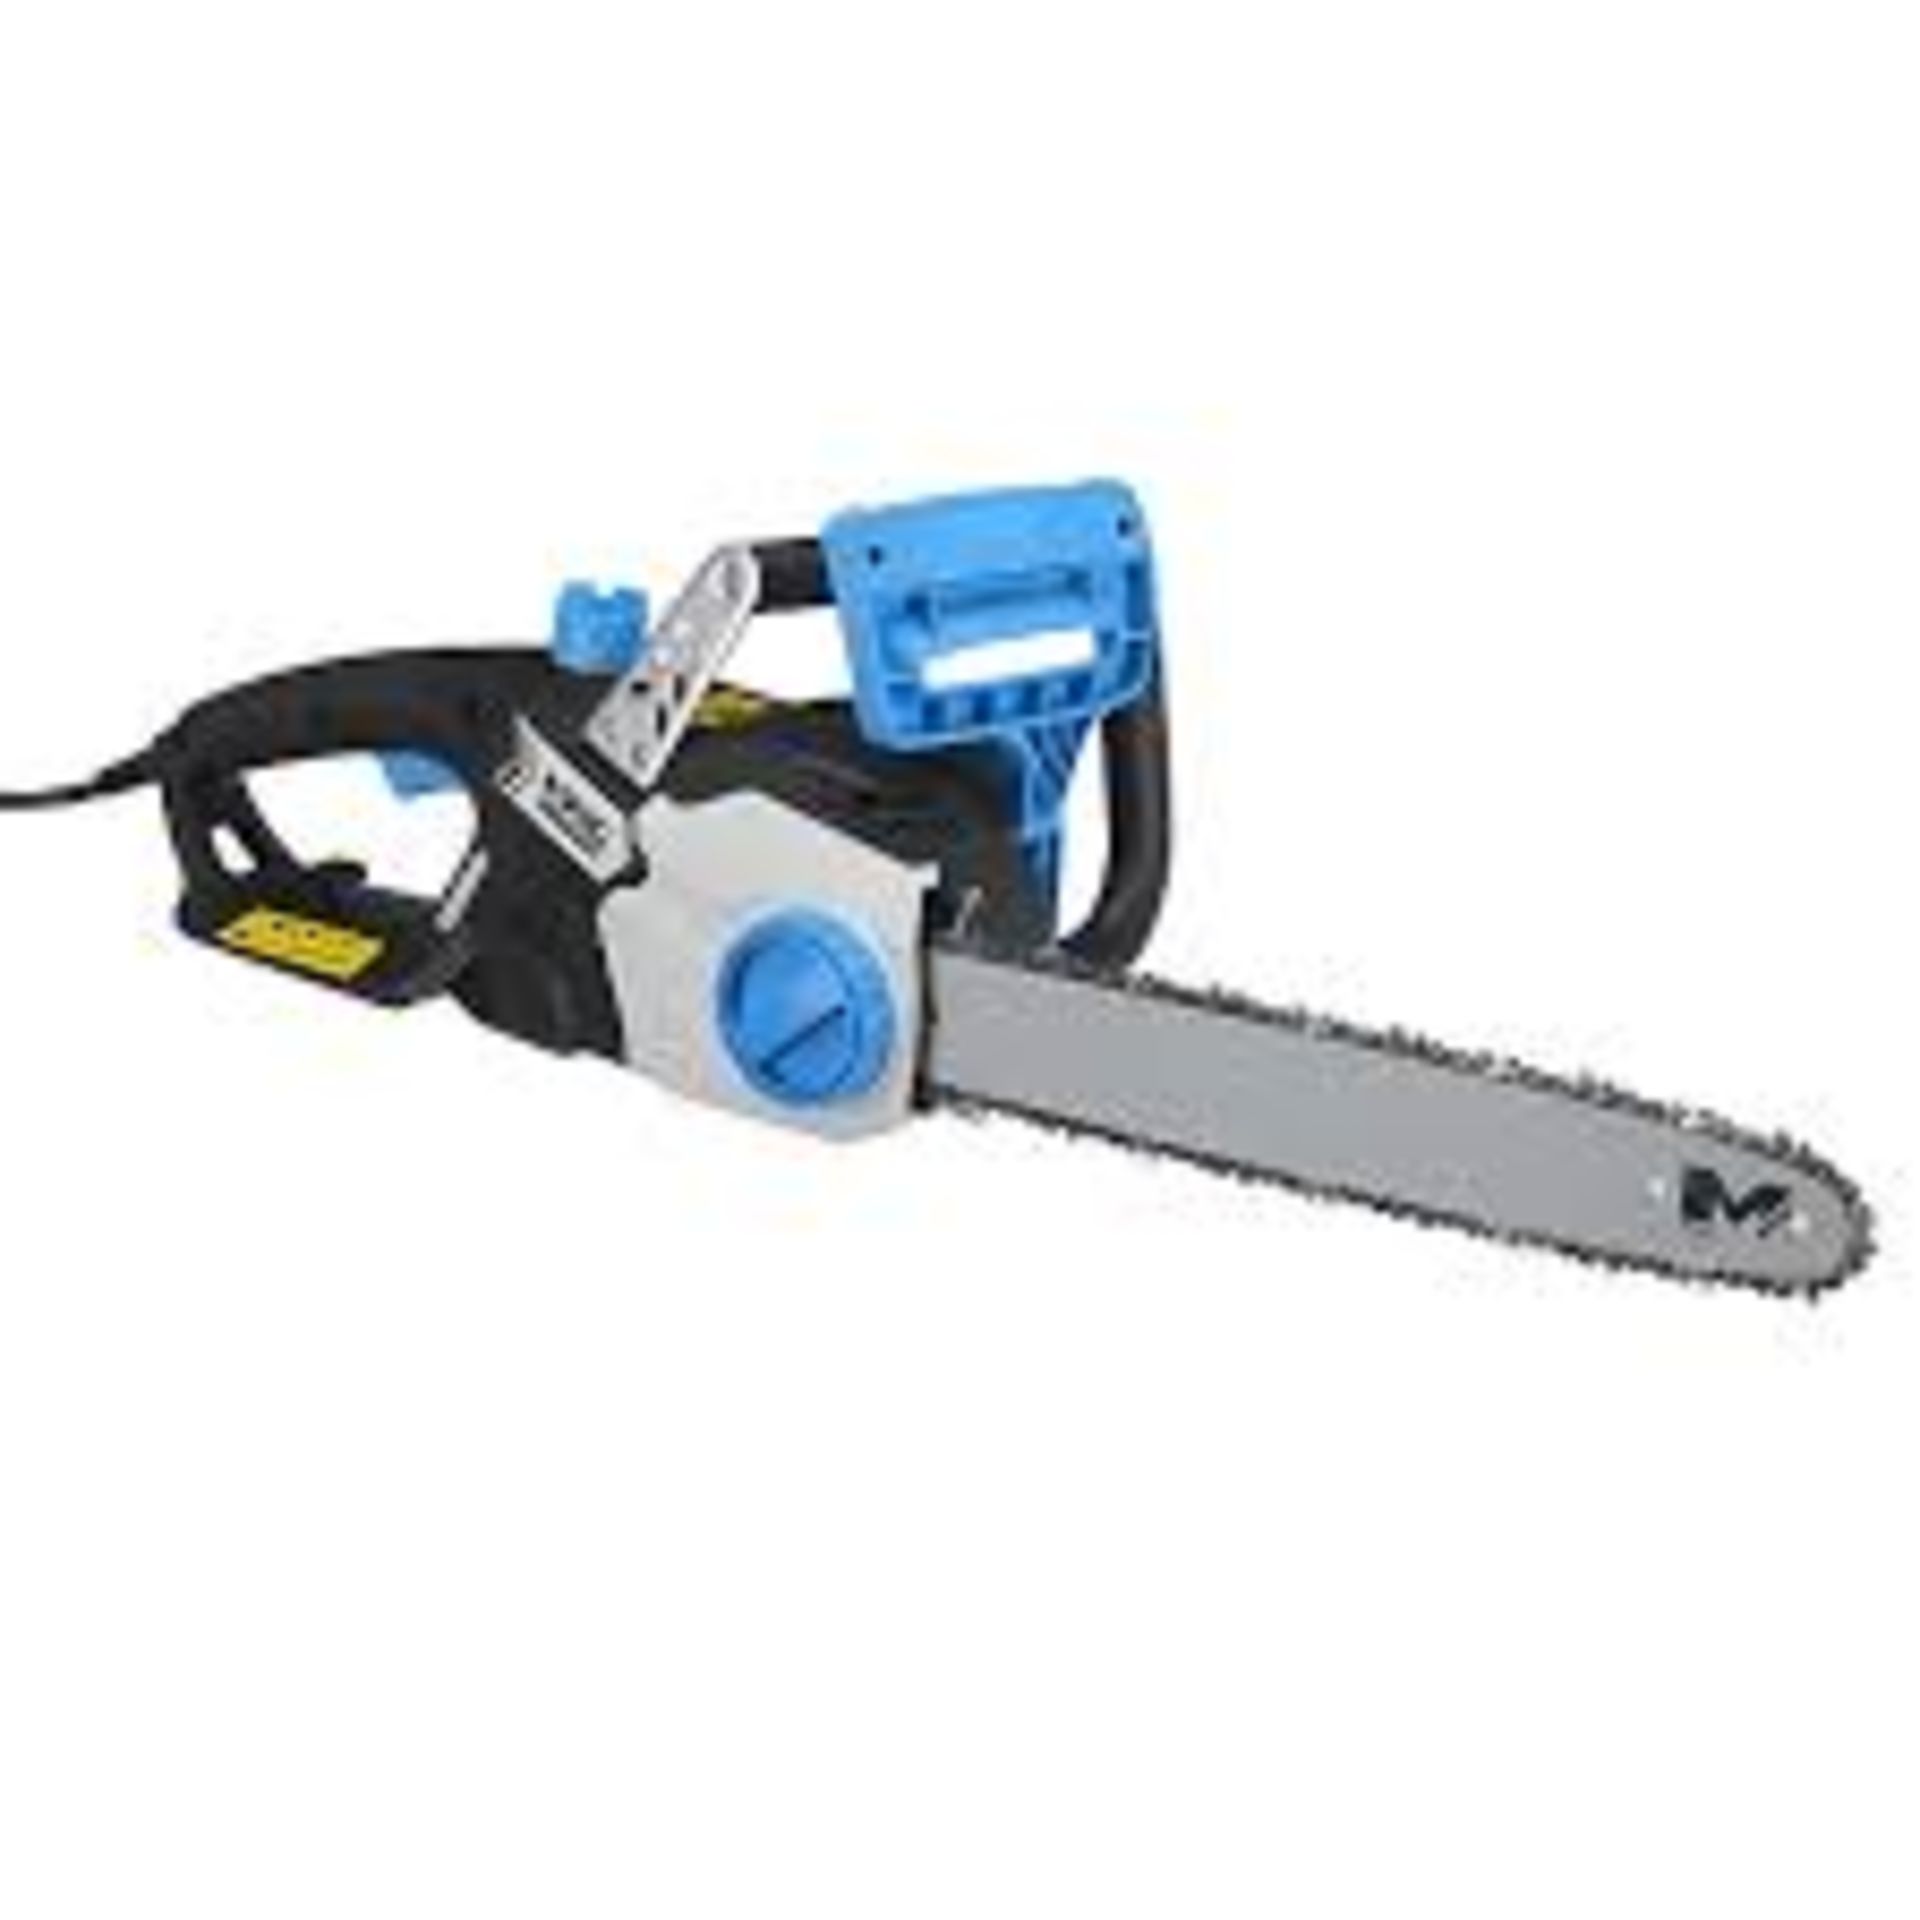 Mac Allister MCSWP2000S-2 2000W 220-240V Corded 400mm Chainsaw . - PW.